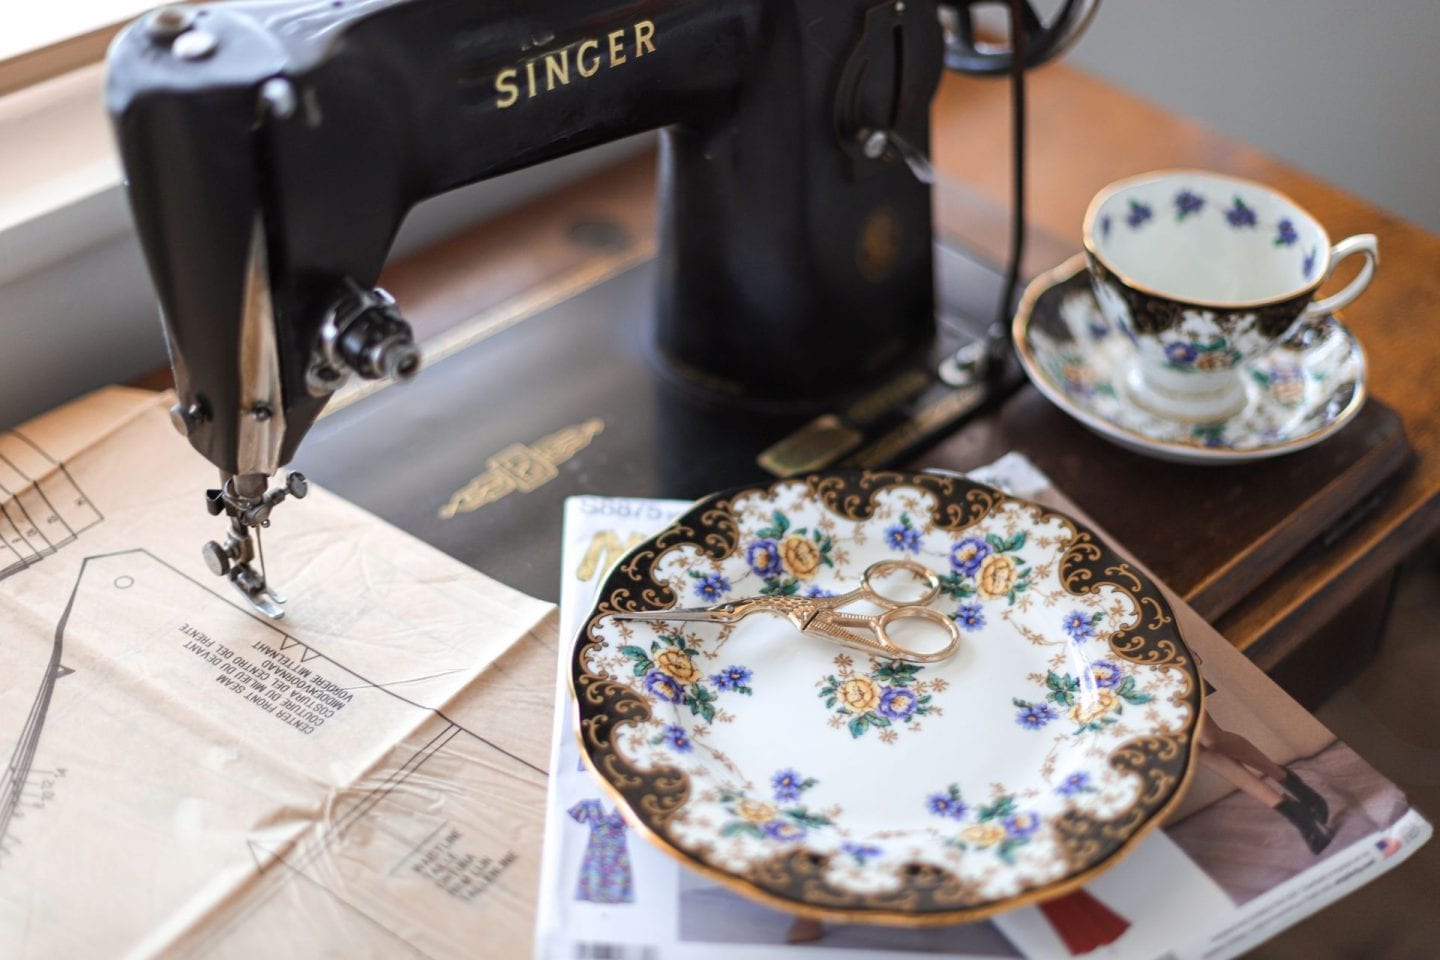 What to look for when shopping for a sewing machine